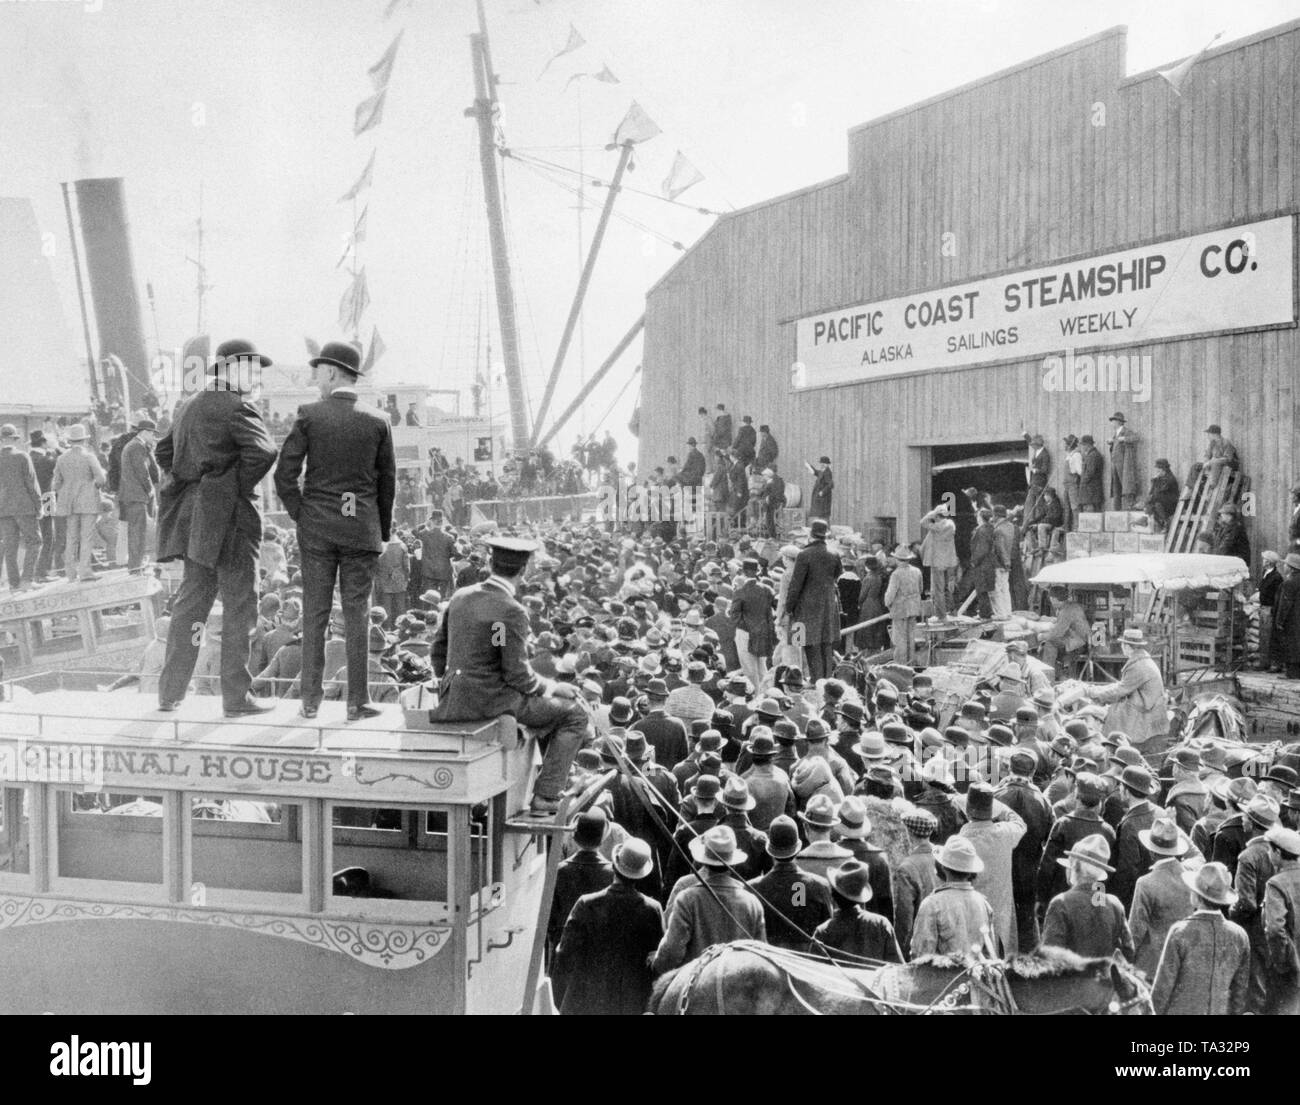 Gold seekers are gathering at the quay of the Pacific Coast Steamship Company in San Francisco to get a place on one of the ships heading to Alaska. Stock Photo